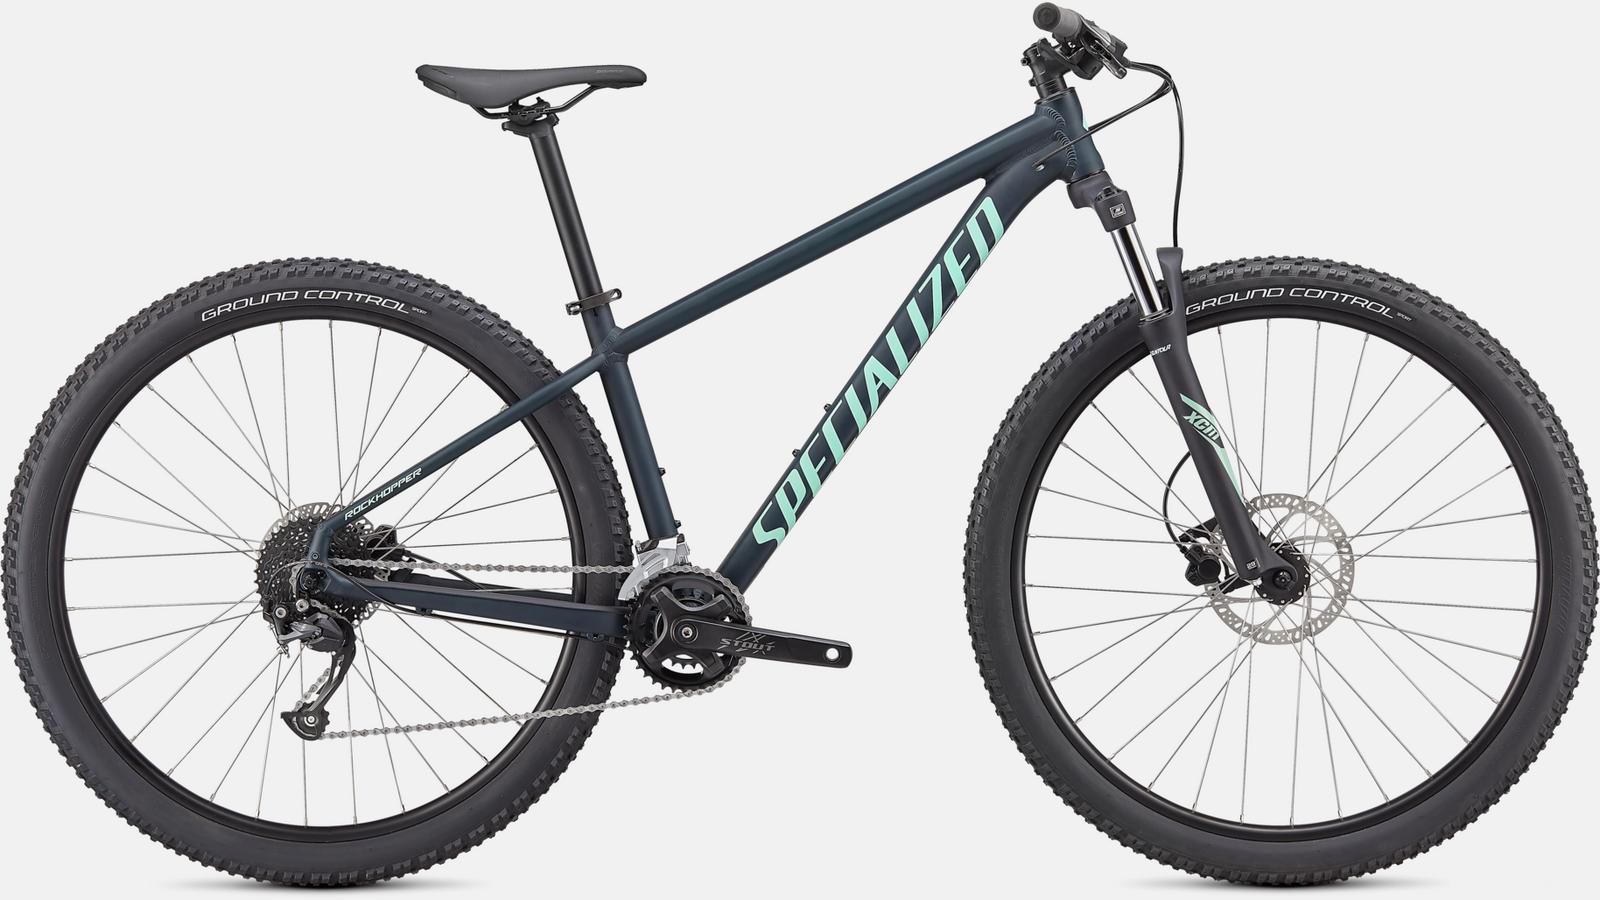 Paint for 2021 Specialized Rockhopper Sport - Satin Forest Green